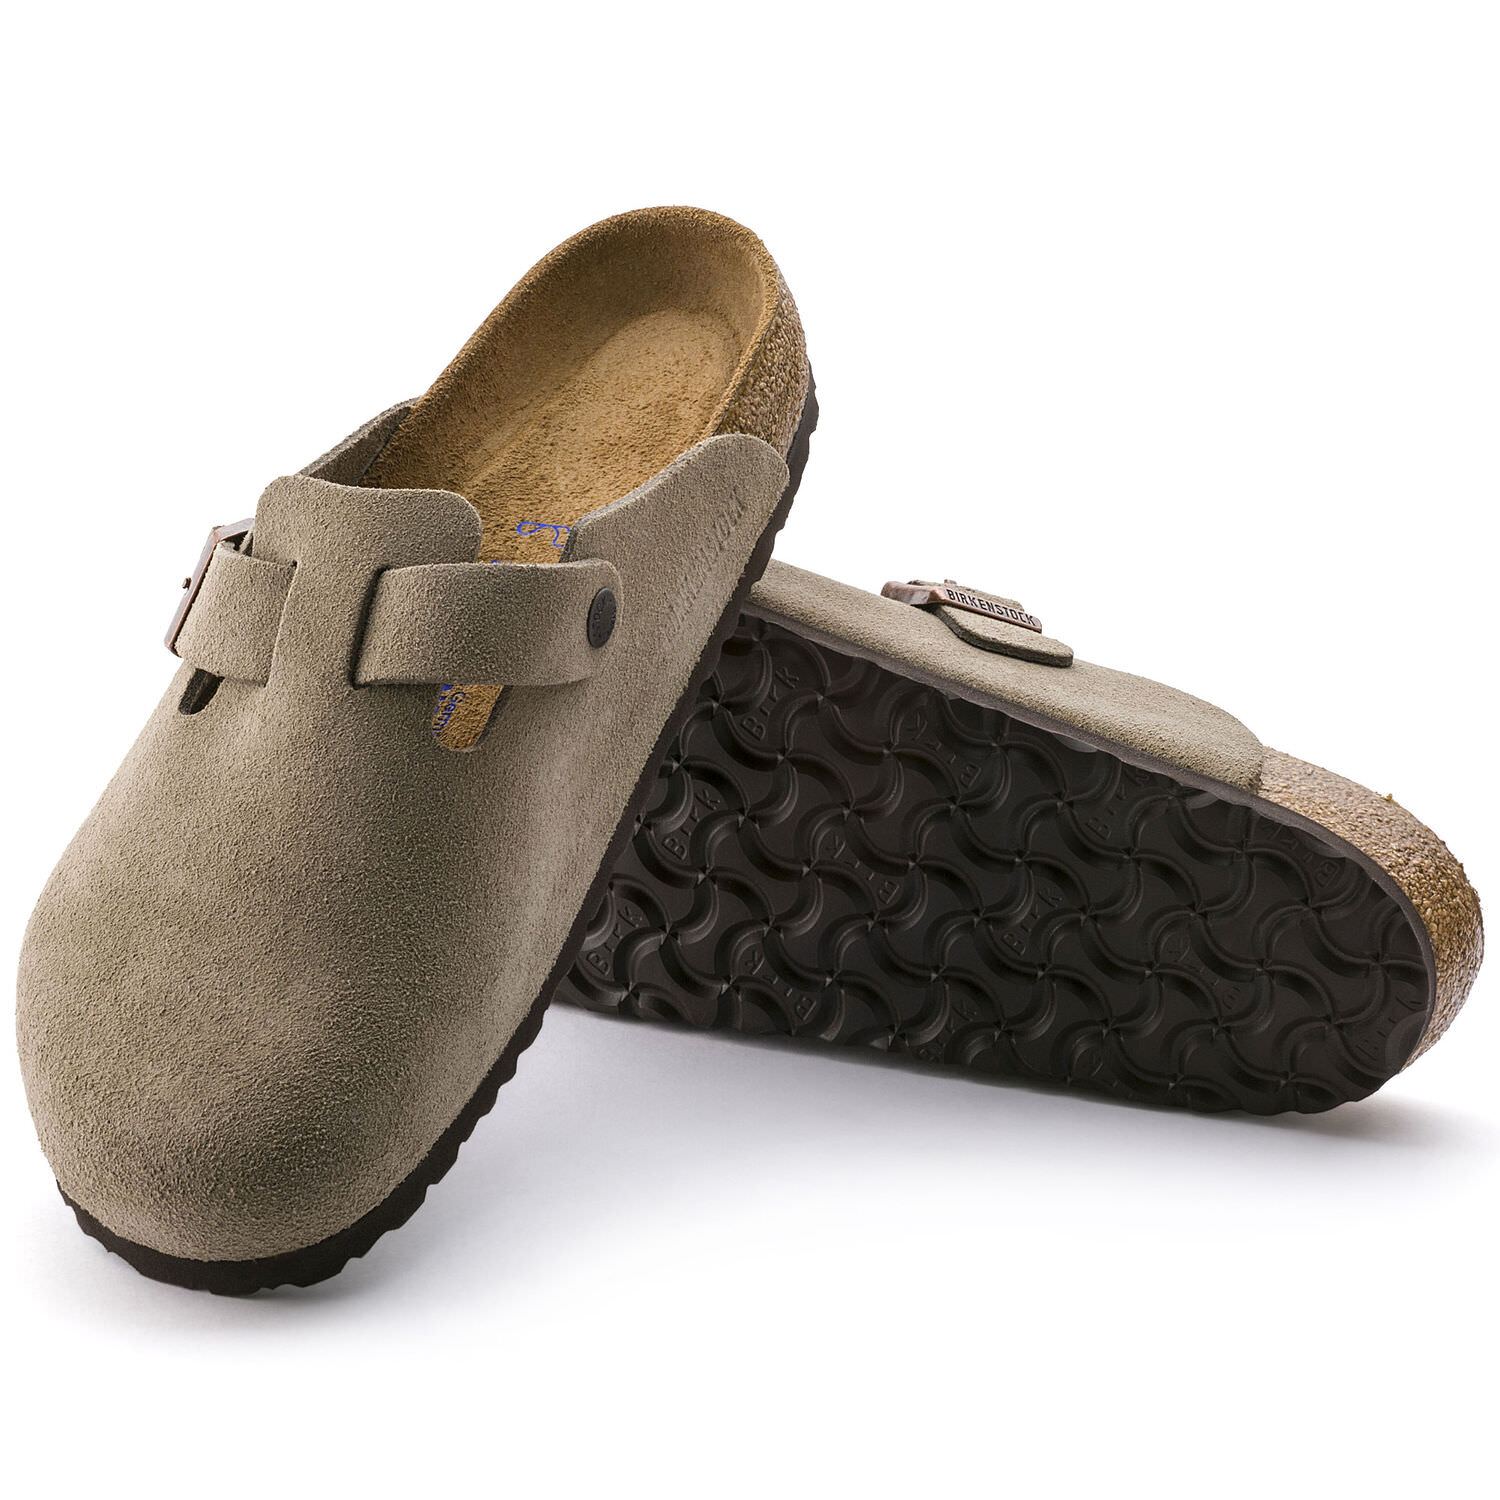 Birkenstock Boston, Narrow Fit, Soft Footbed, Suede Leather, Taupe Clogs Birkenstock Classic Taupe 37 